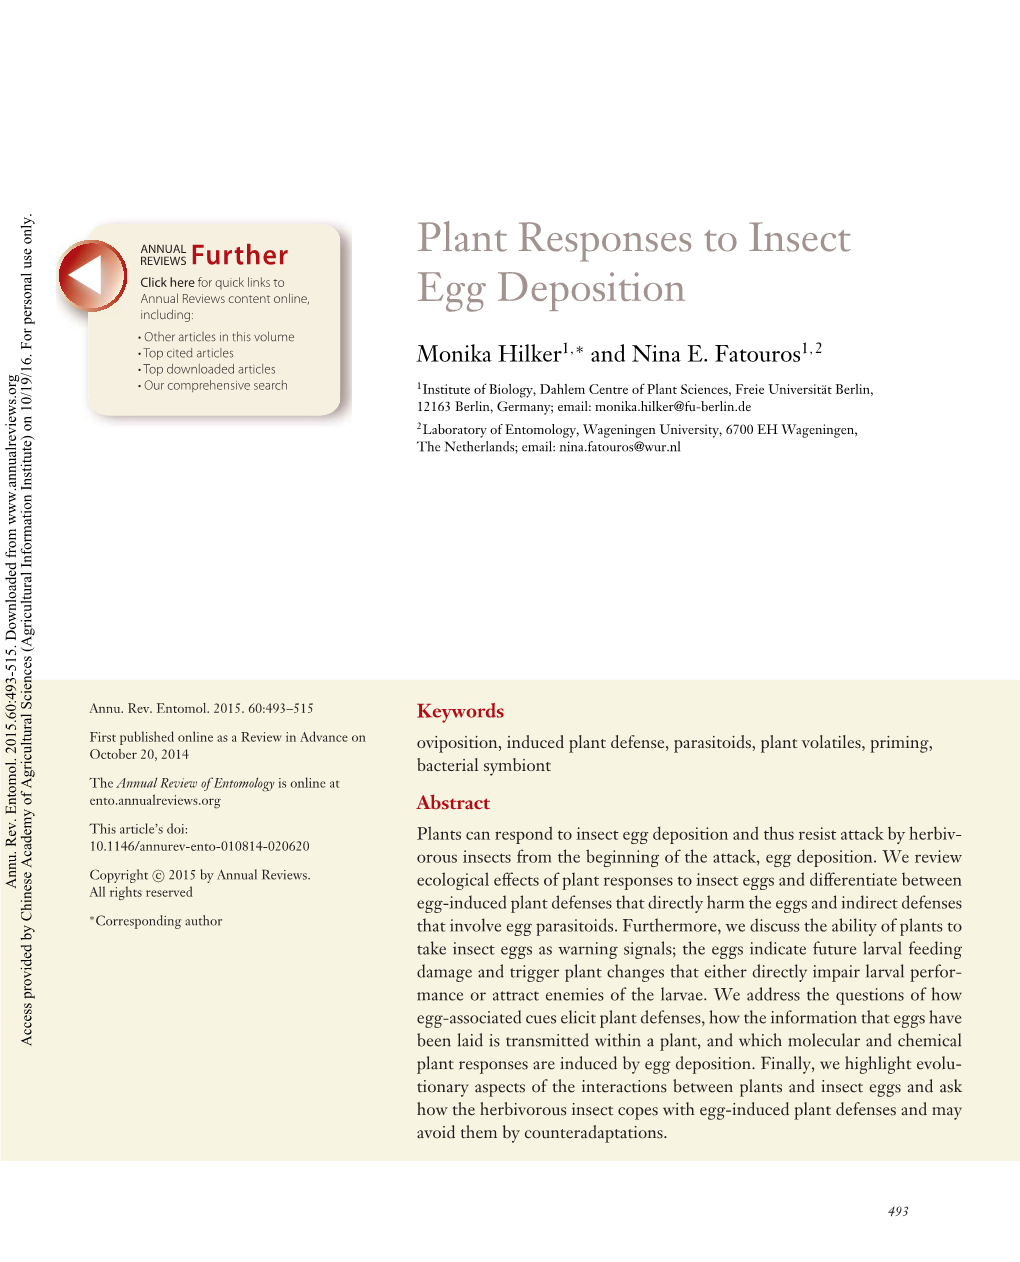 Plant Responses to Insect Egg Deposition